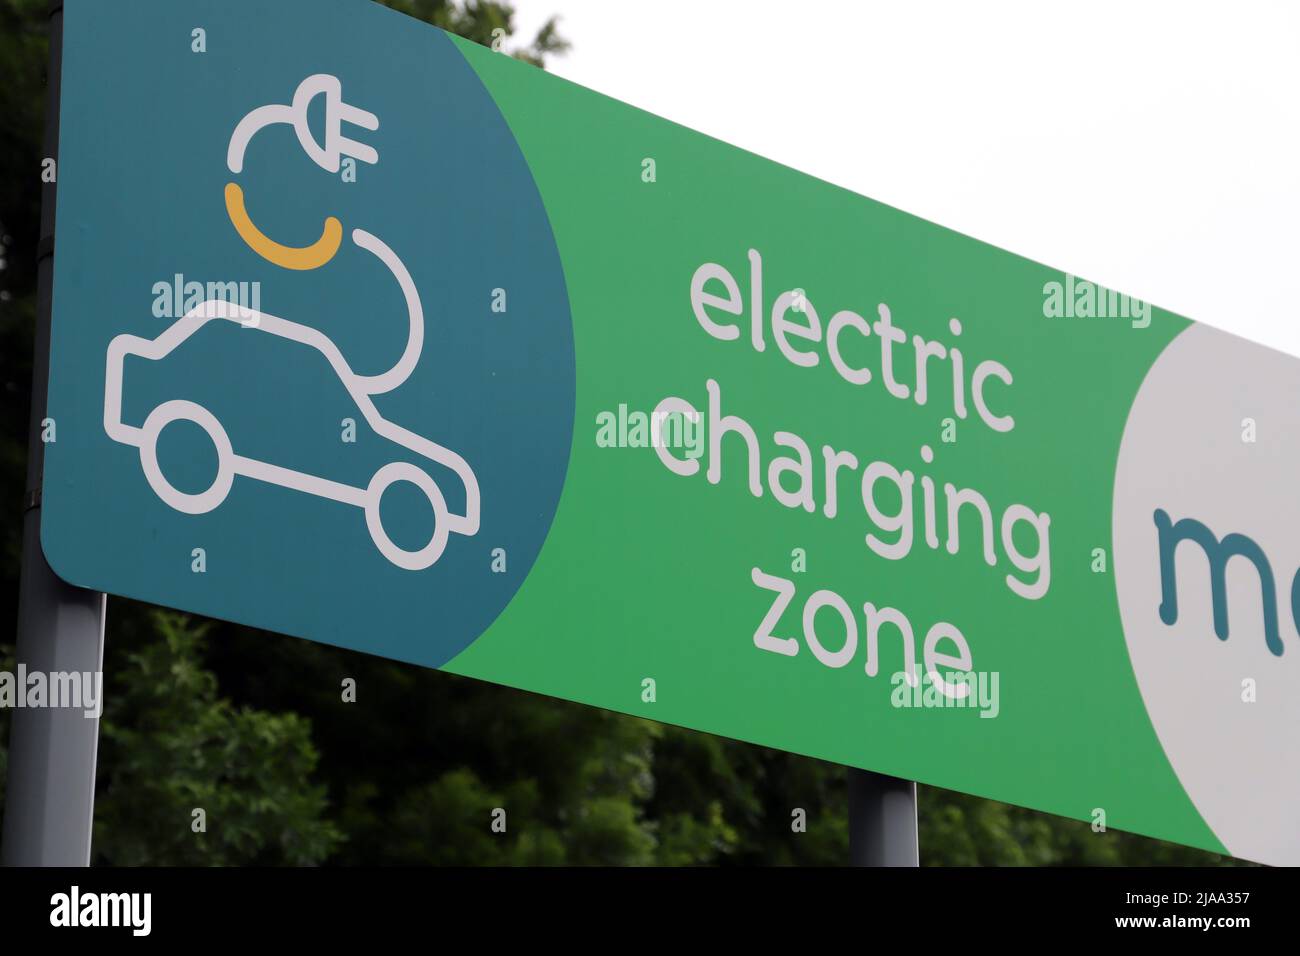 Electric Vehicle Charging Station Sign at Moto Donington Park Services on the M1 motorway Stock Photo